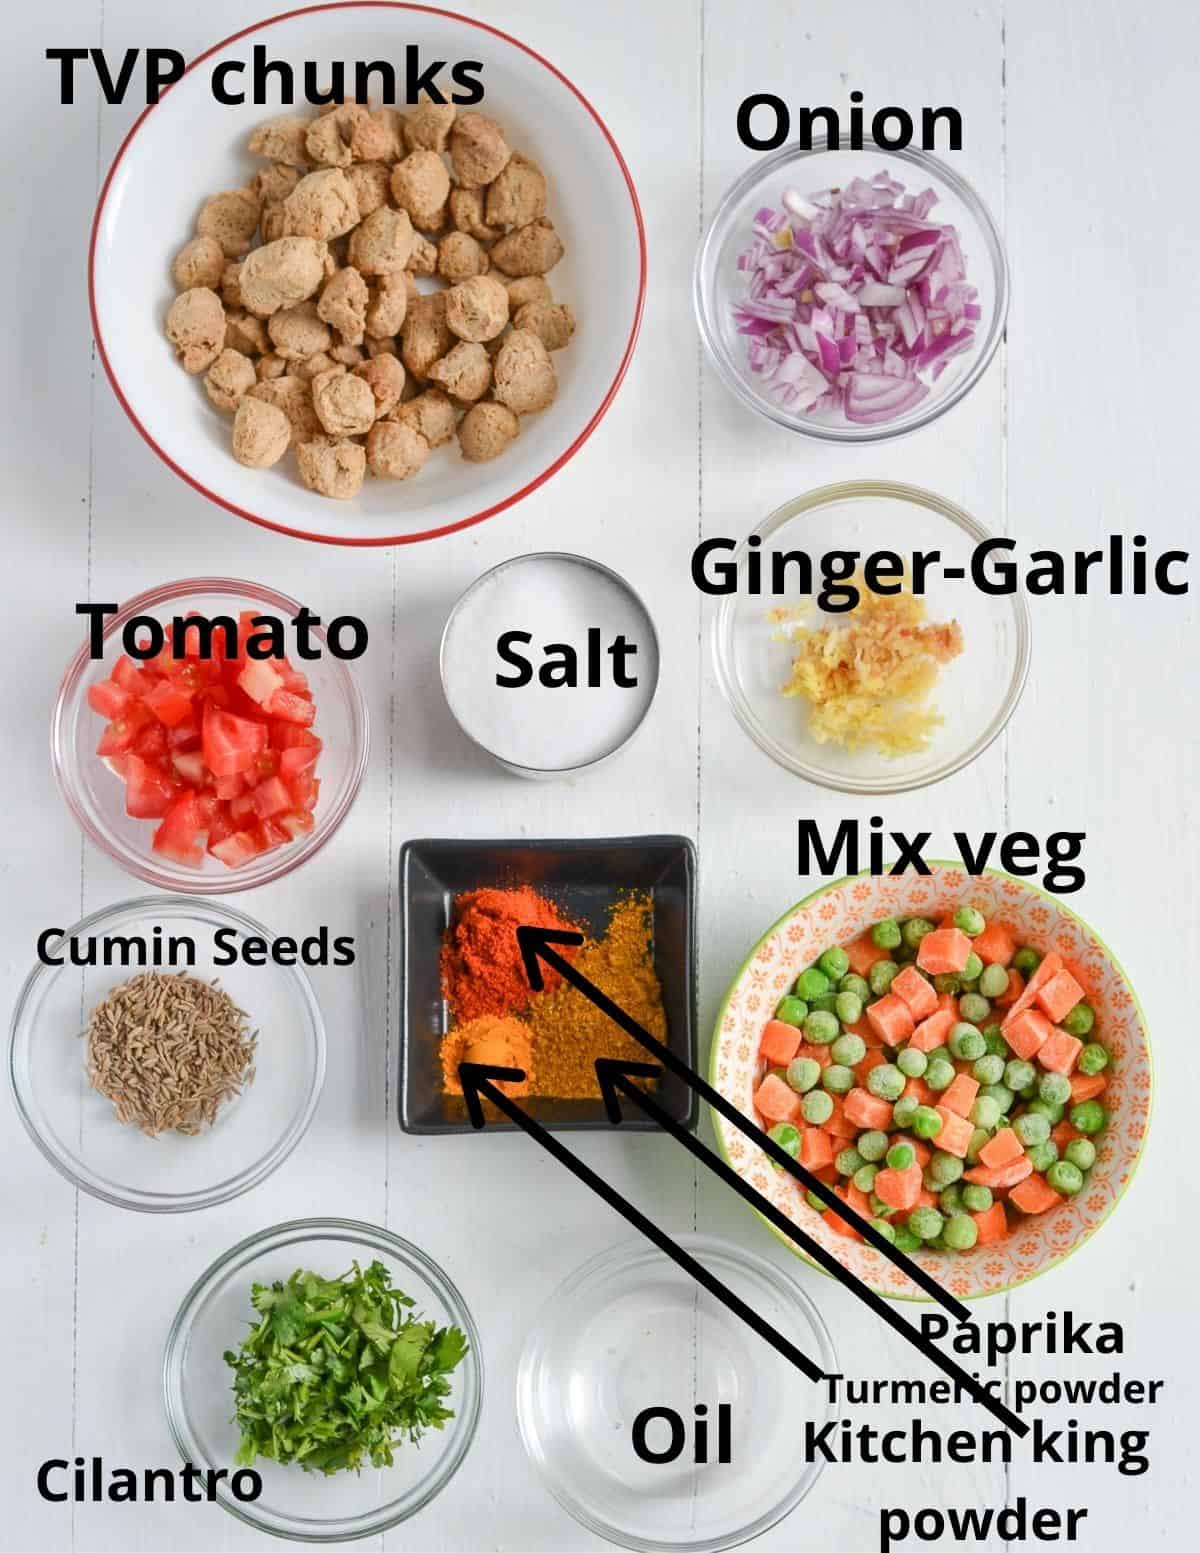 all the ingredients listed in the pic to make TVP chunks curry